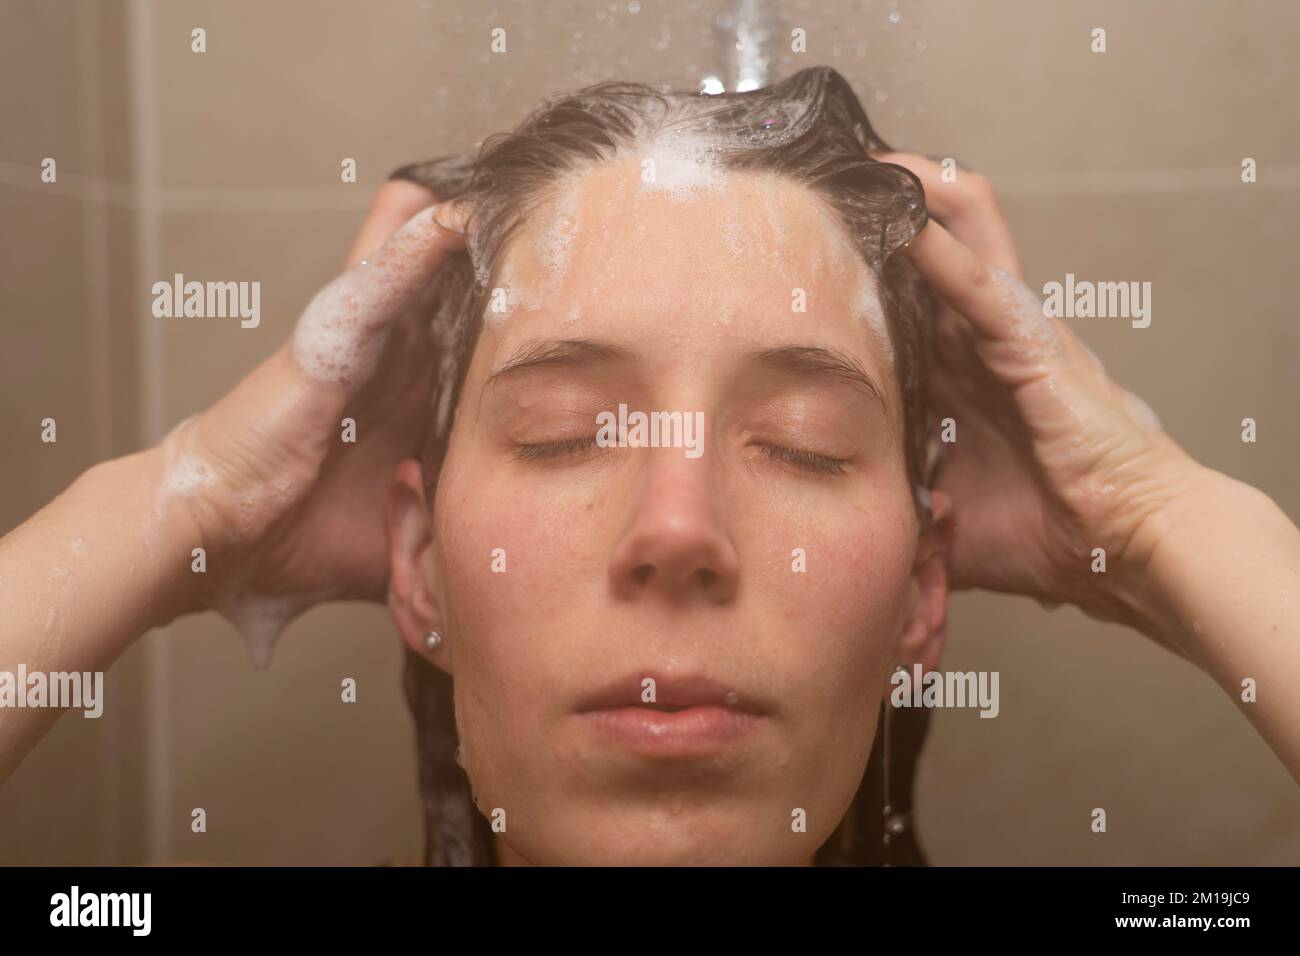 A woman in her thirties washing her hair in the shower with her eyes shut and rubbing shampoo suds into her hair Stock Photo